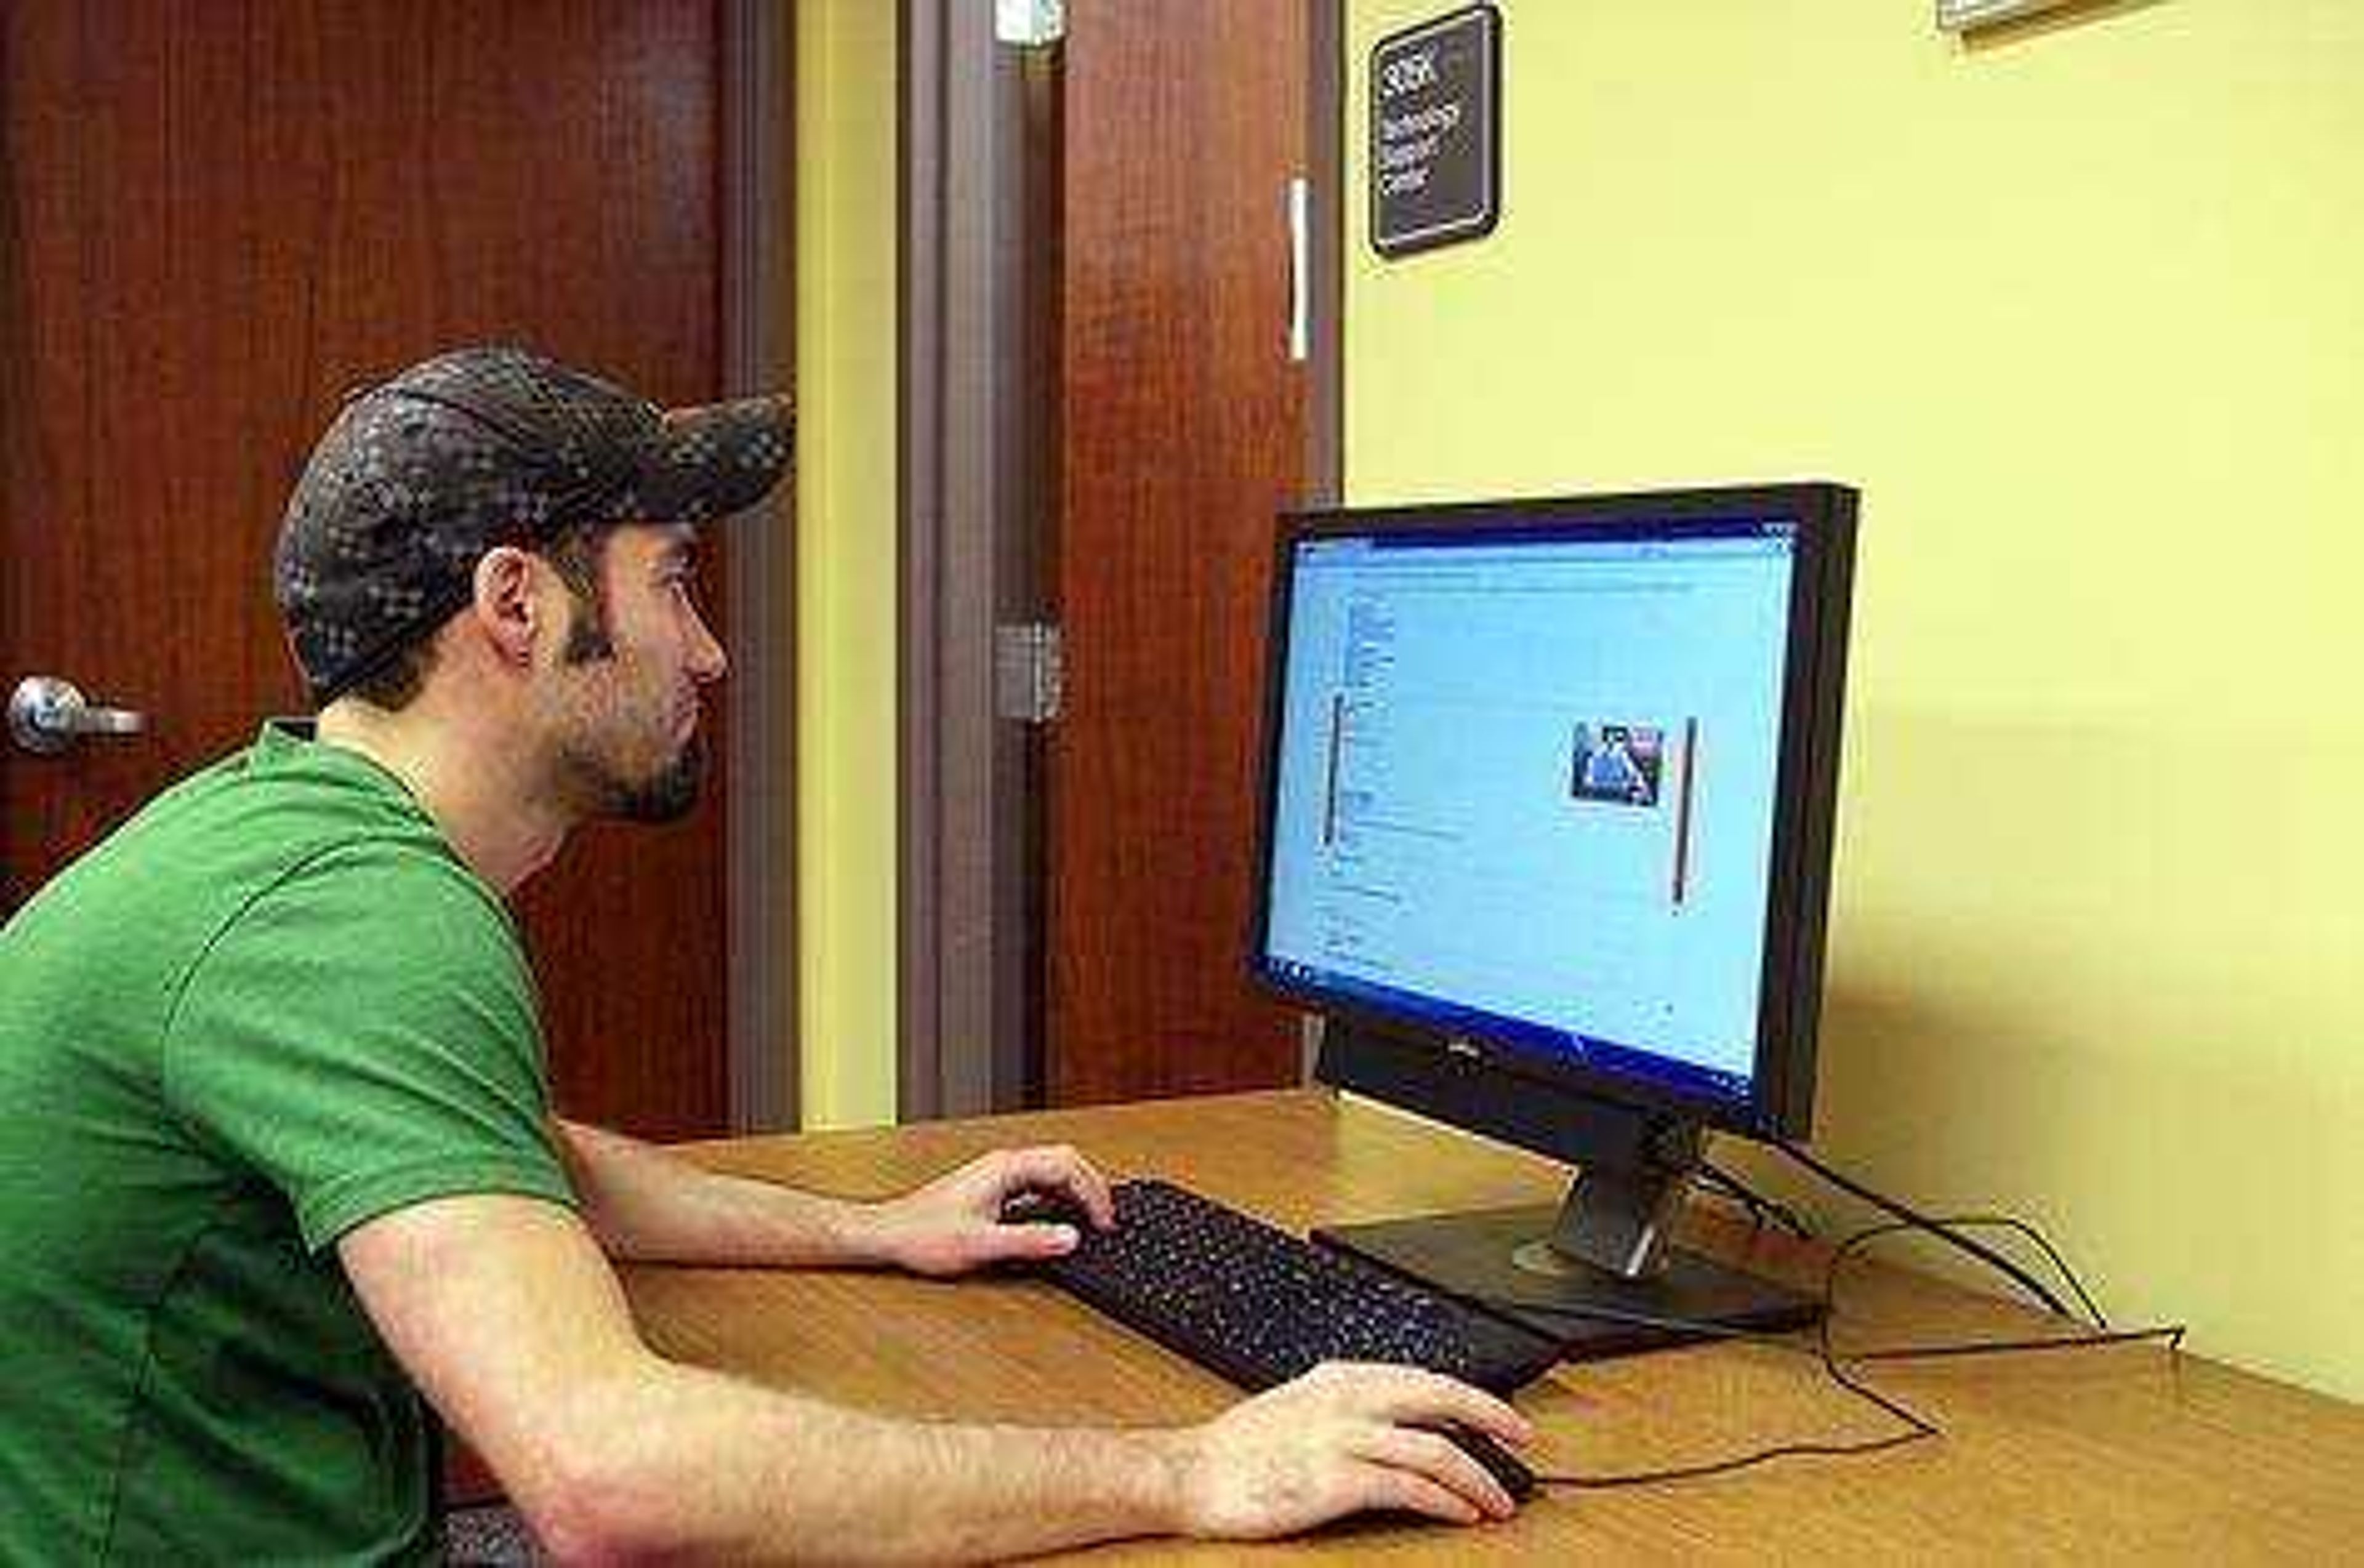 Andrew Schmid uses Southeast's new learning system Moodle at Kent Library. Photo by Nathan Hamilton